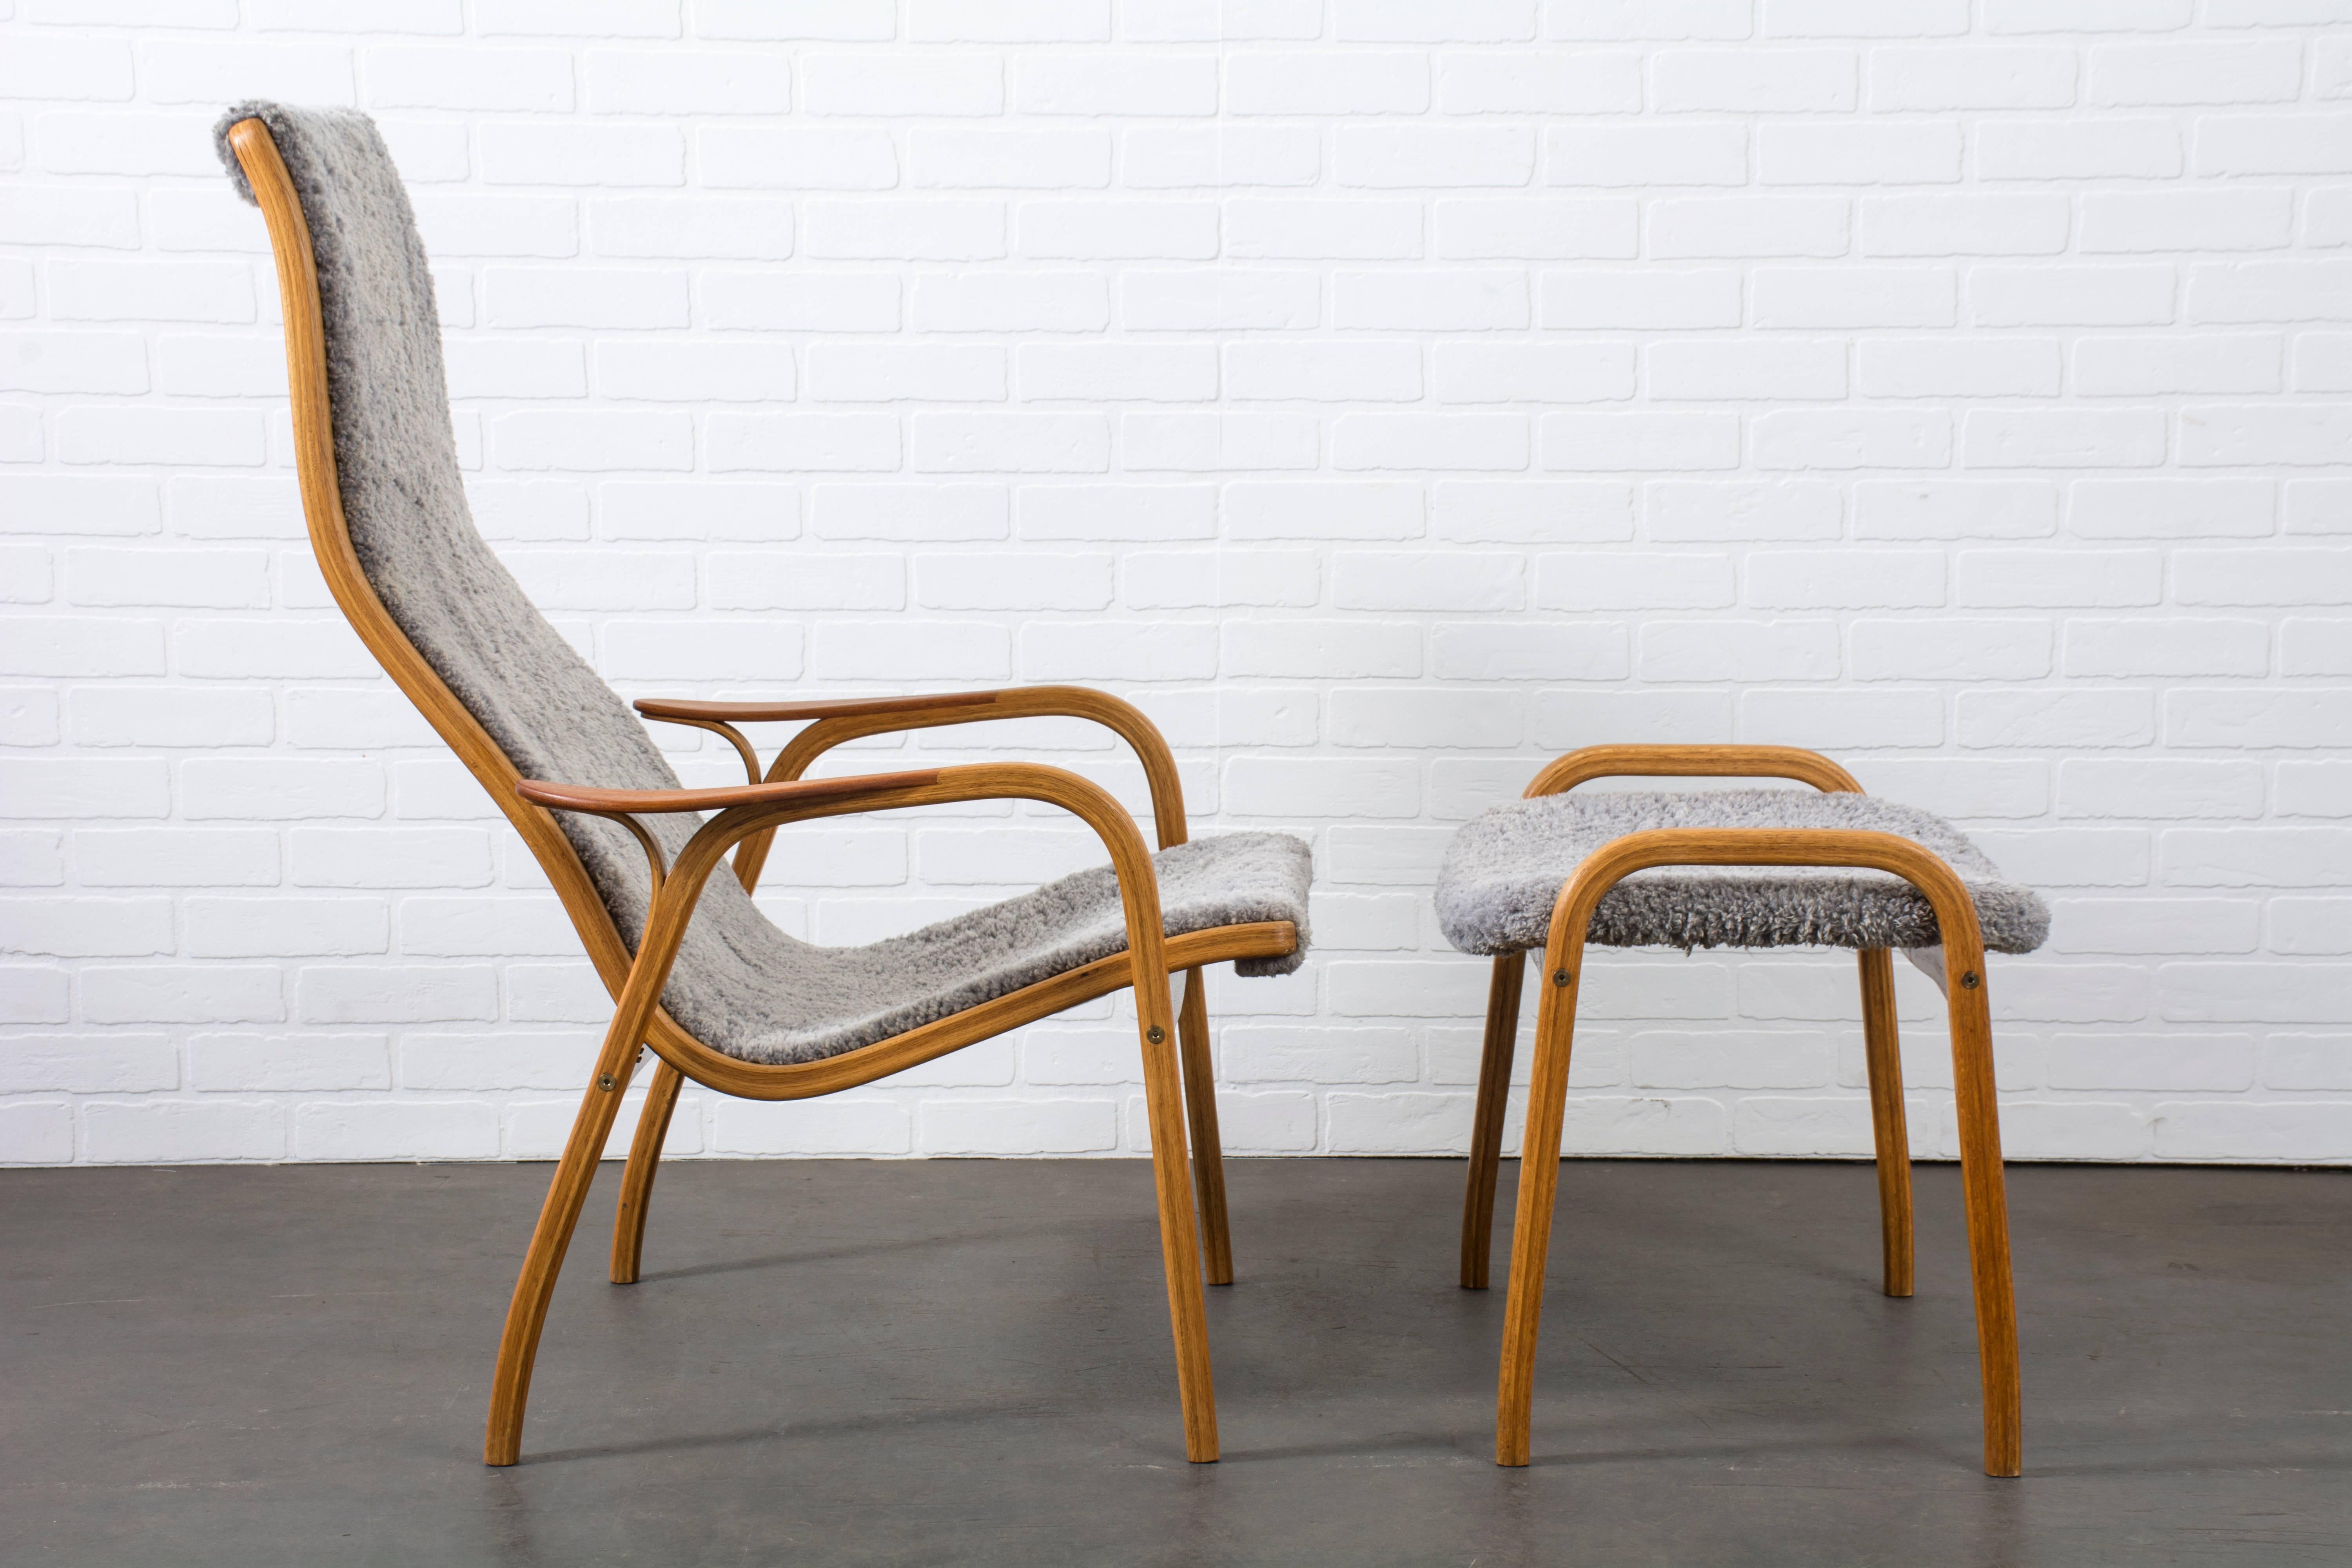 This high back 'Lamino' lounge chair and ottoman was designed by Yngve Ekström for Swedese Mobler in the 1950s. It features a teak frame and the original grey sheepskin upholstery.